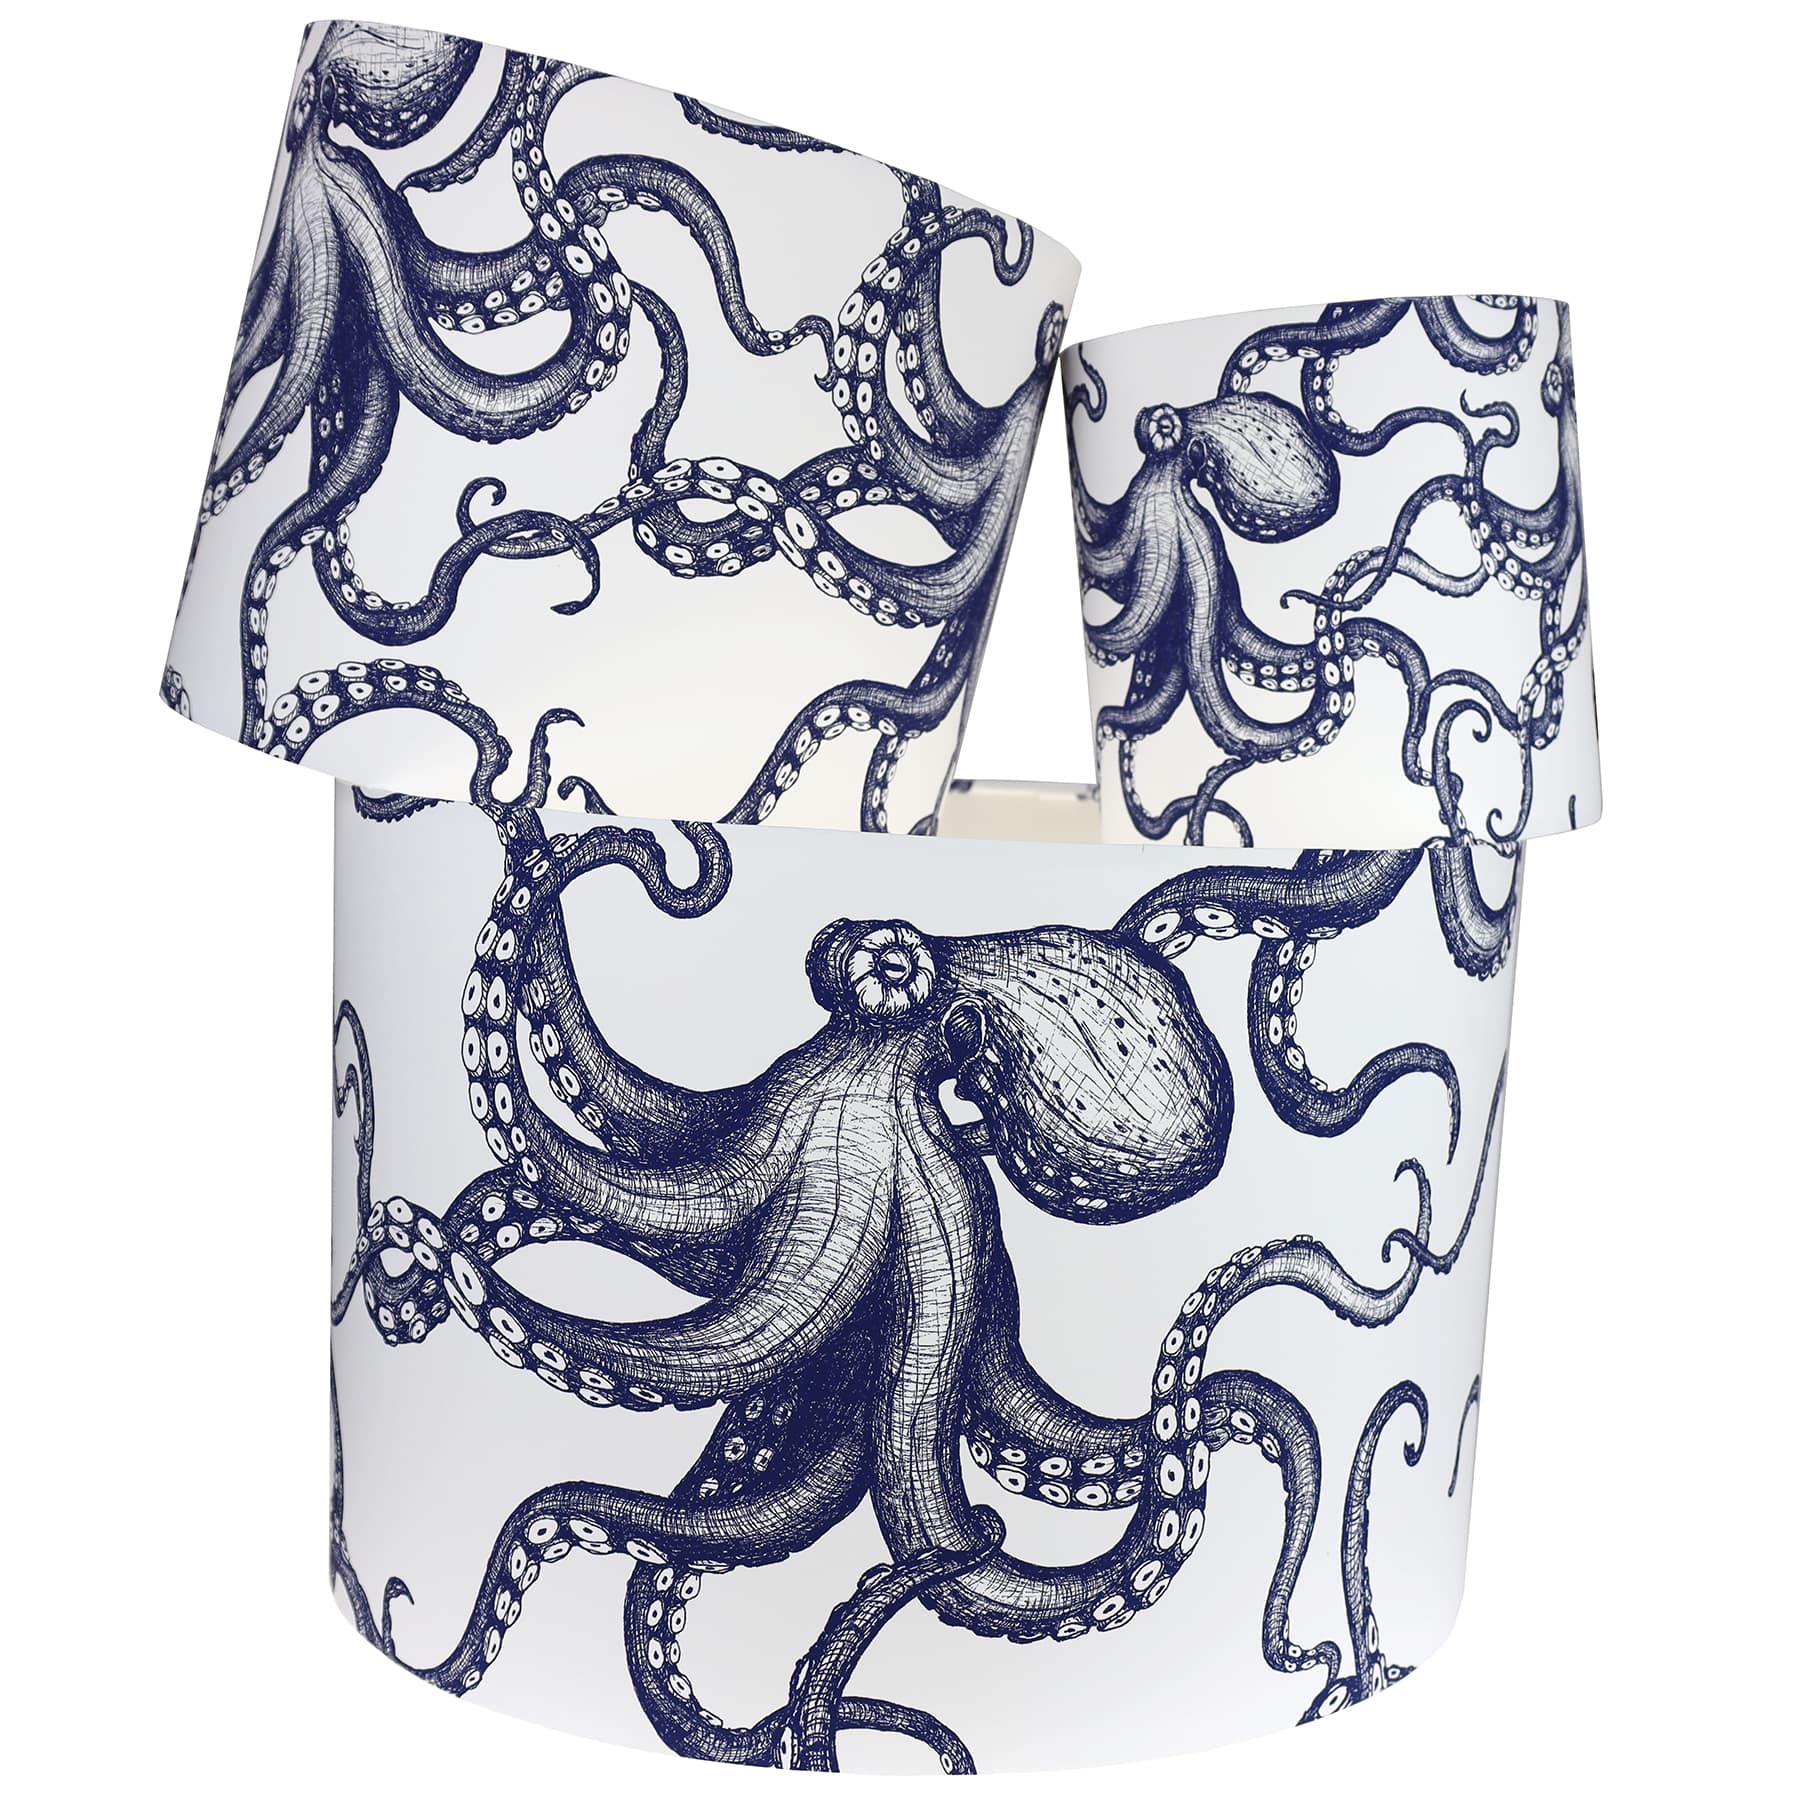 Our Classic Navy Octopus design on a white background.The lampshades are shown in a stack of three showing all three sizes.